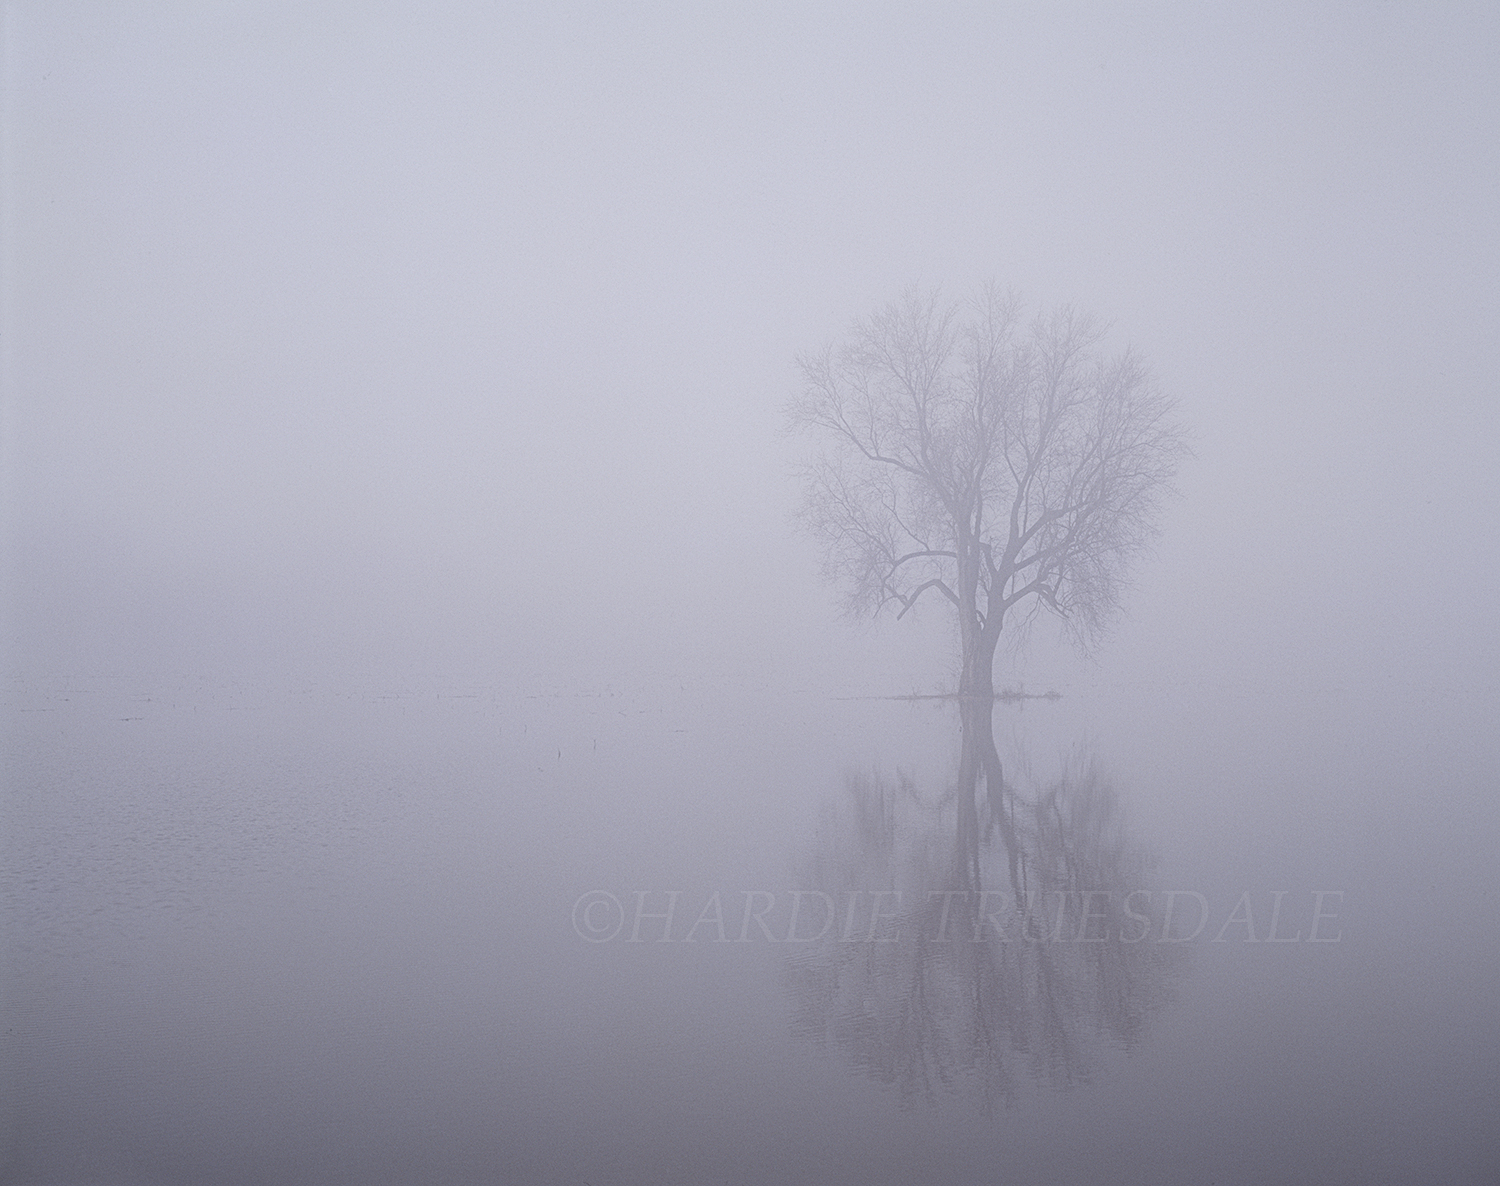  Gks#266 'Bare Tree in the Mist" 